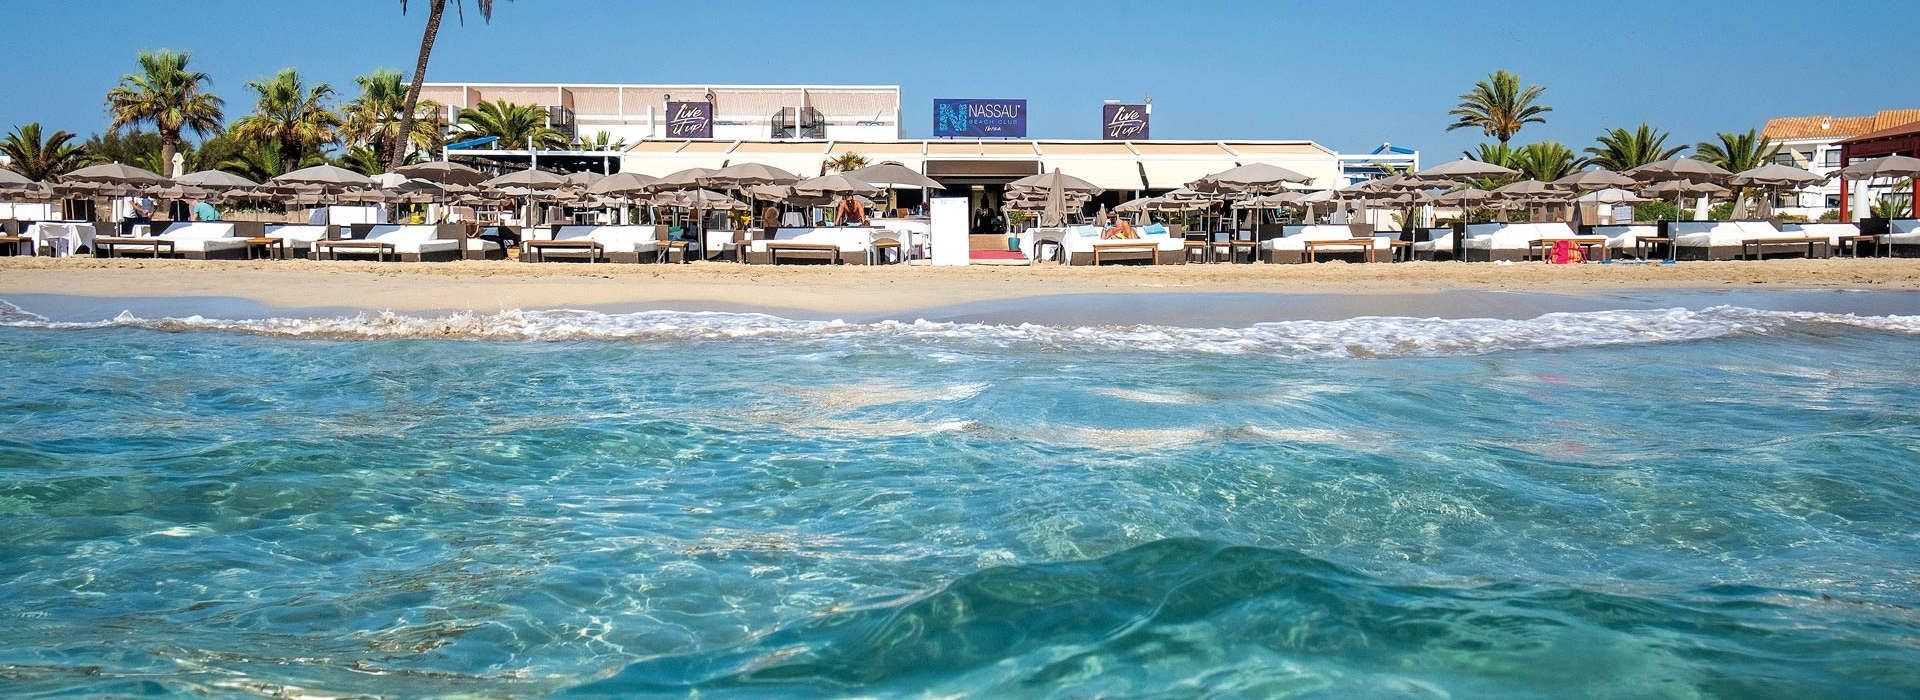 Beach Bars in Playa d'en Bossa, Ibiza: Recommended Options